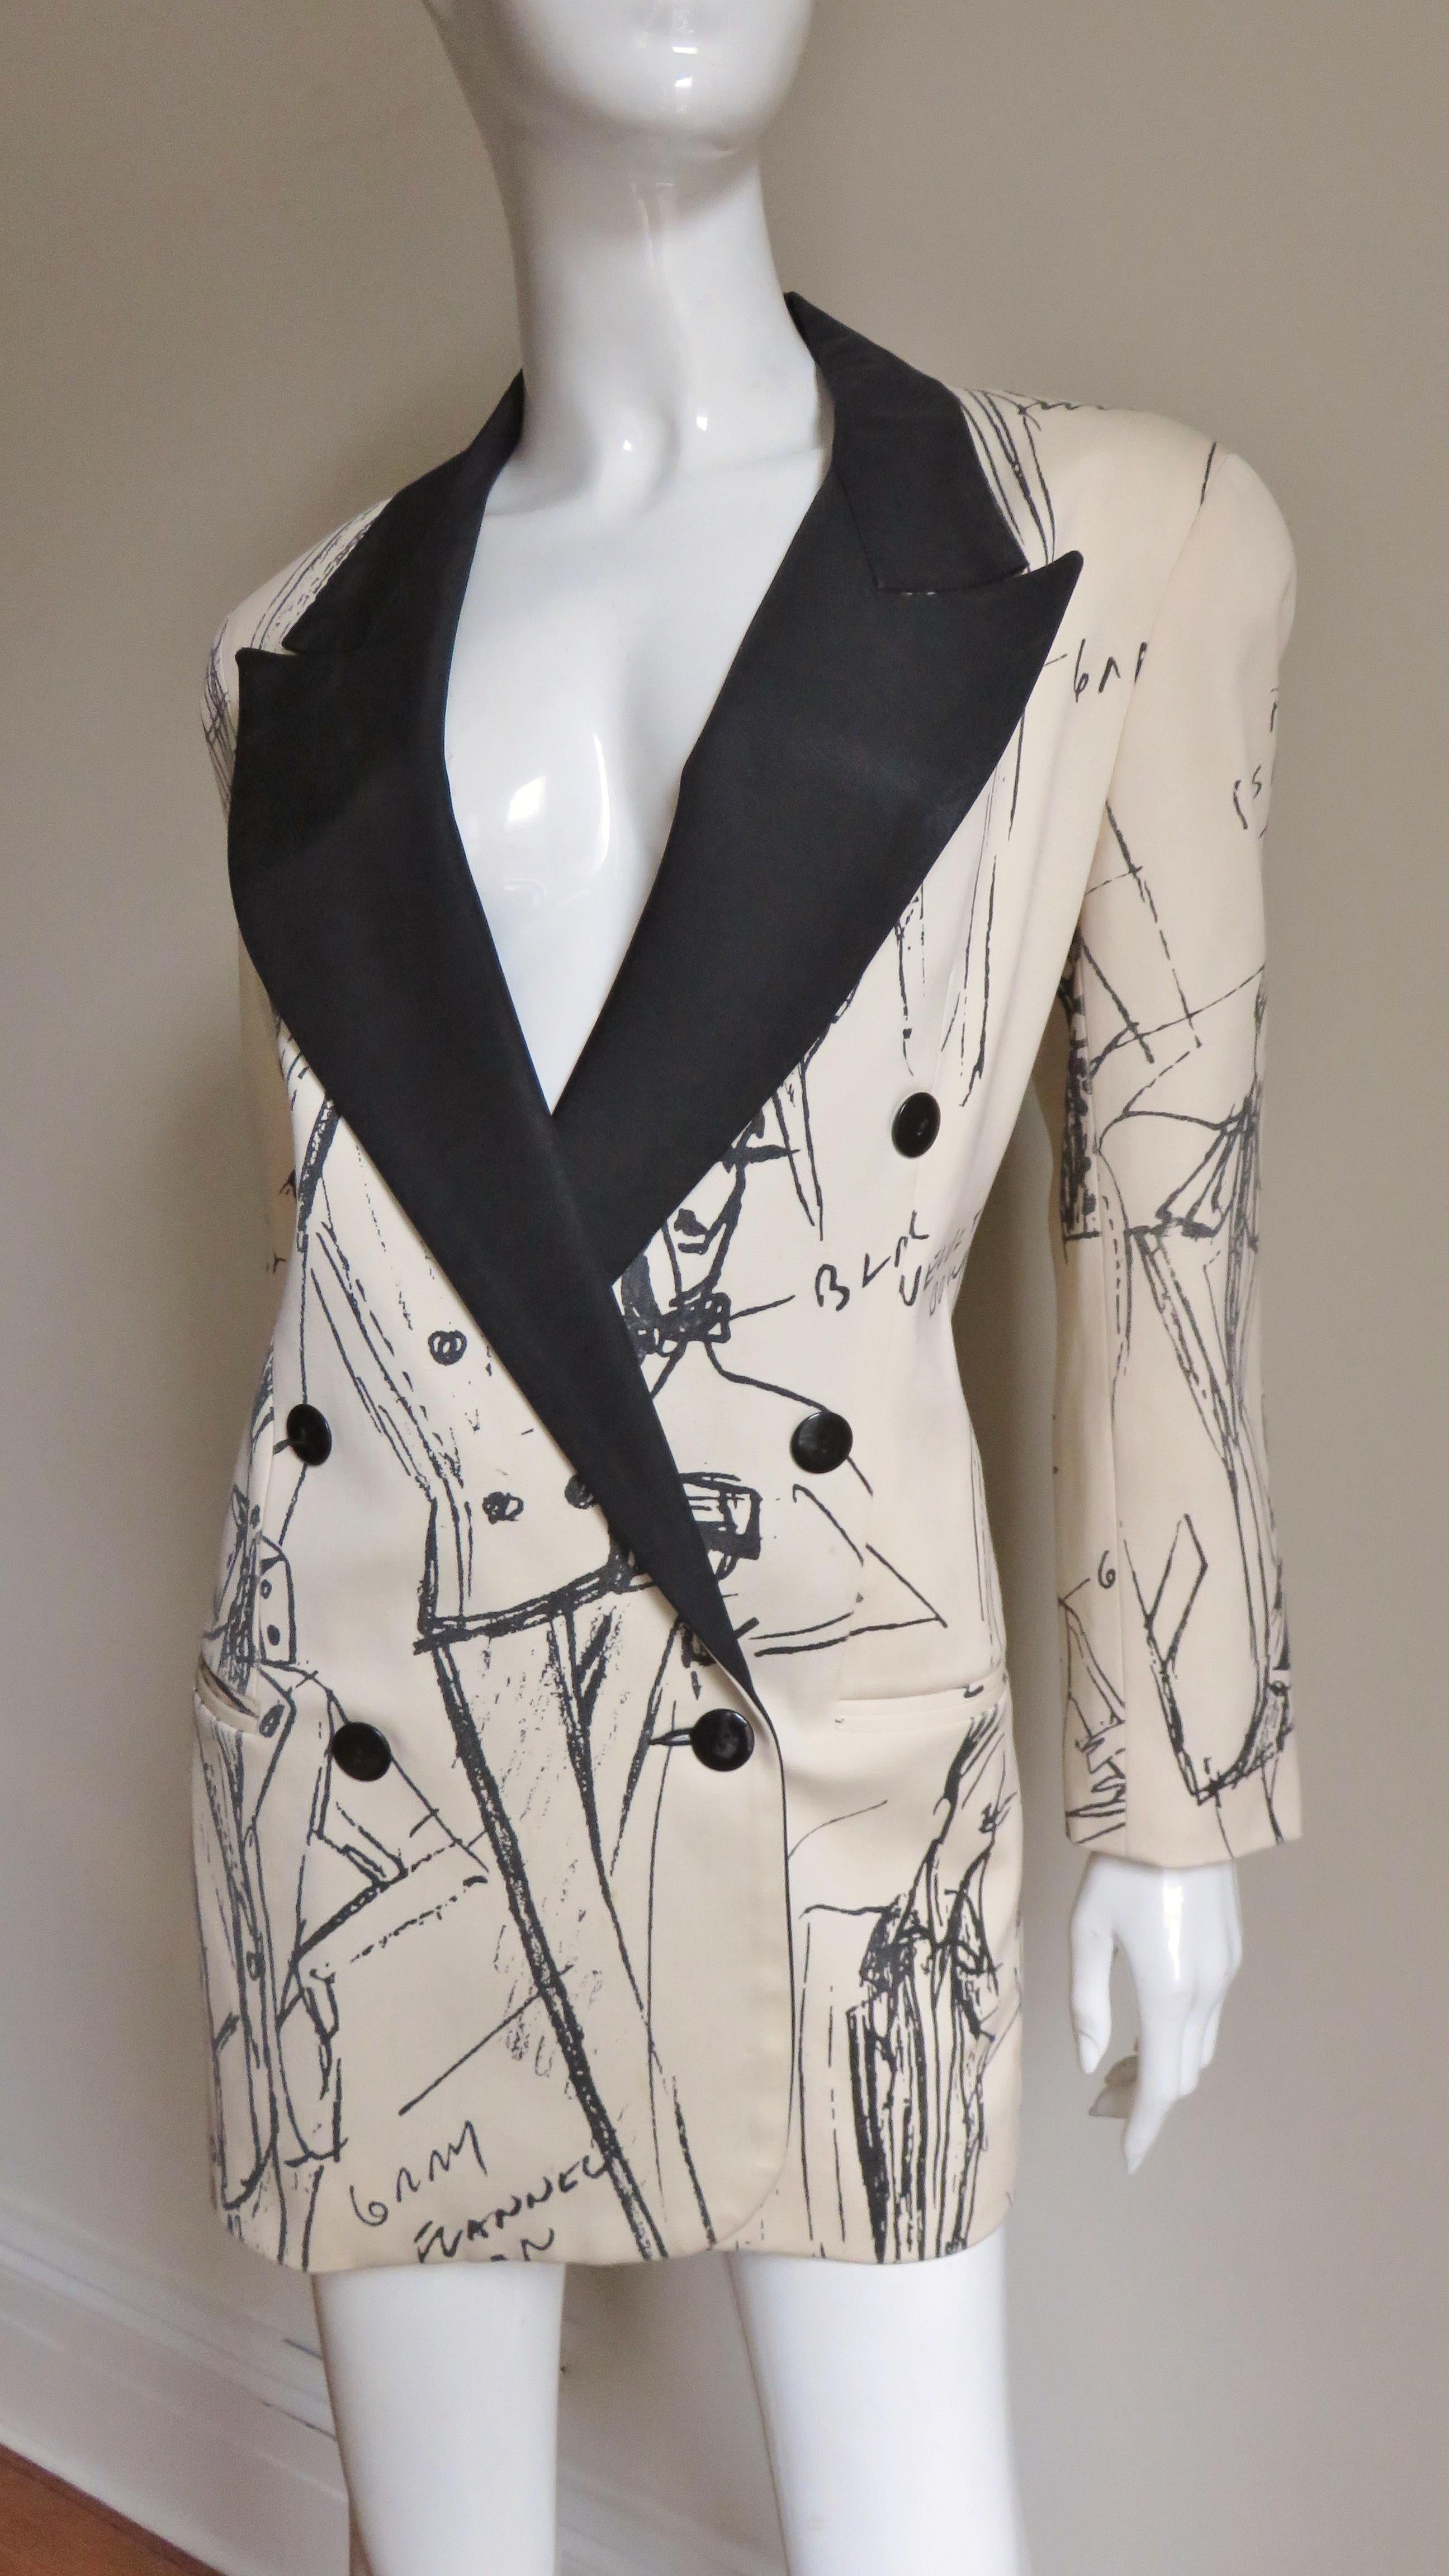 A unique off white wool jacket from Randolf Duke. It is double breasted with a black twill notched collar, hip welt pockets and long sleeves. Black buttons are on the cuffs and the jacket front. It has a unique pattern of fashion designer model